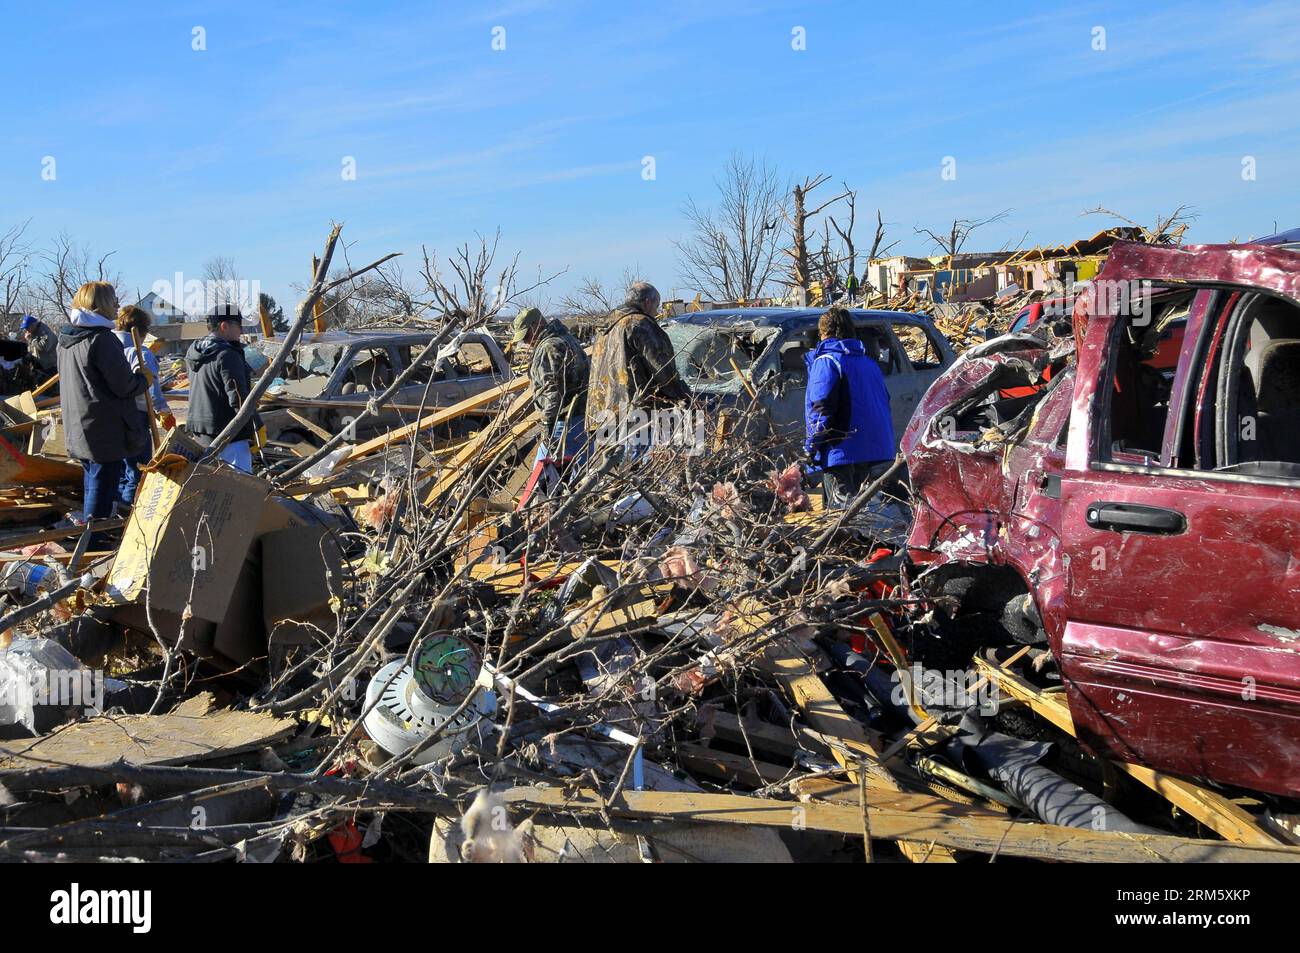 Bildnummer: 60732982  Datum: 19.11.2013  Copyright: imago/Xinhua ILLINOIS, Nov. 19, 2013 (Xinhua) -- Local residents work in ruins after a tornado attack in the town of Washington in Illinois, the United States, on Nov. 19, 2013. At least 16 were killed during tornado attacks on Sunday, according to the National Weather Service. (Xinhua/Zhang Baoping)(ybg) US-ILLINOIS-TORNADO PUBLICATIONxNOTxINxCHN Gesellschaft USA Naturkatastrophe x0x xsk 2013 quer Aufmacher premiumd     60732982 Date 19 11 2013 Copyright Imago XINHUA Illinois Nov 19 2013 XINHUA Local Residents Work in Ruins After a Tornado A Stock Photo